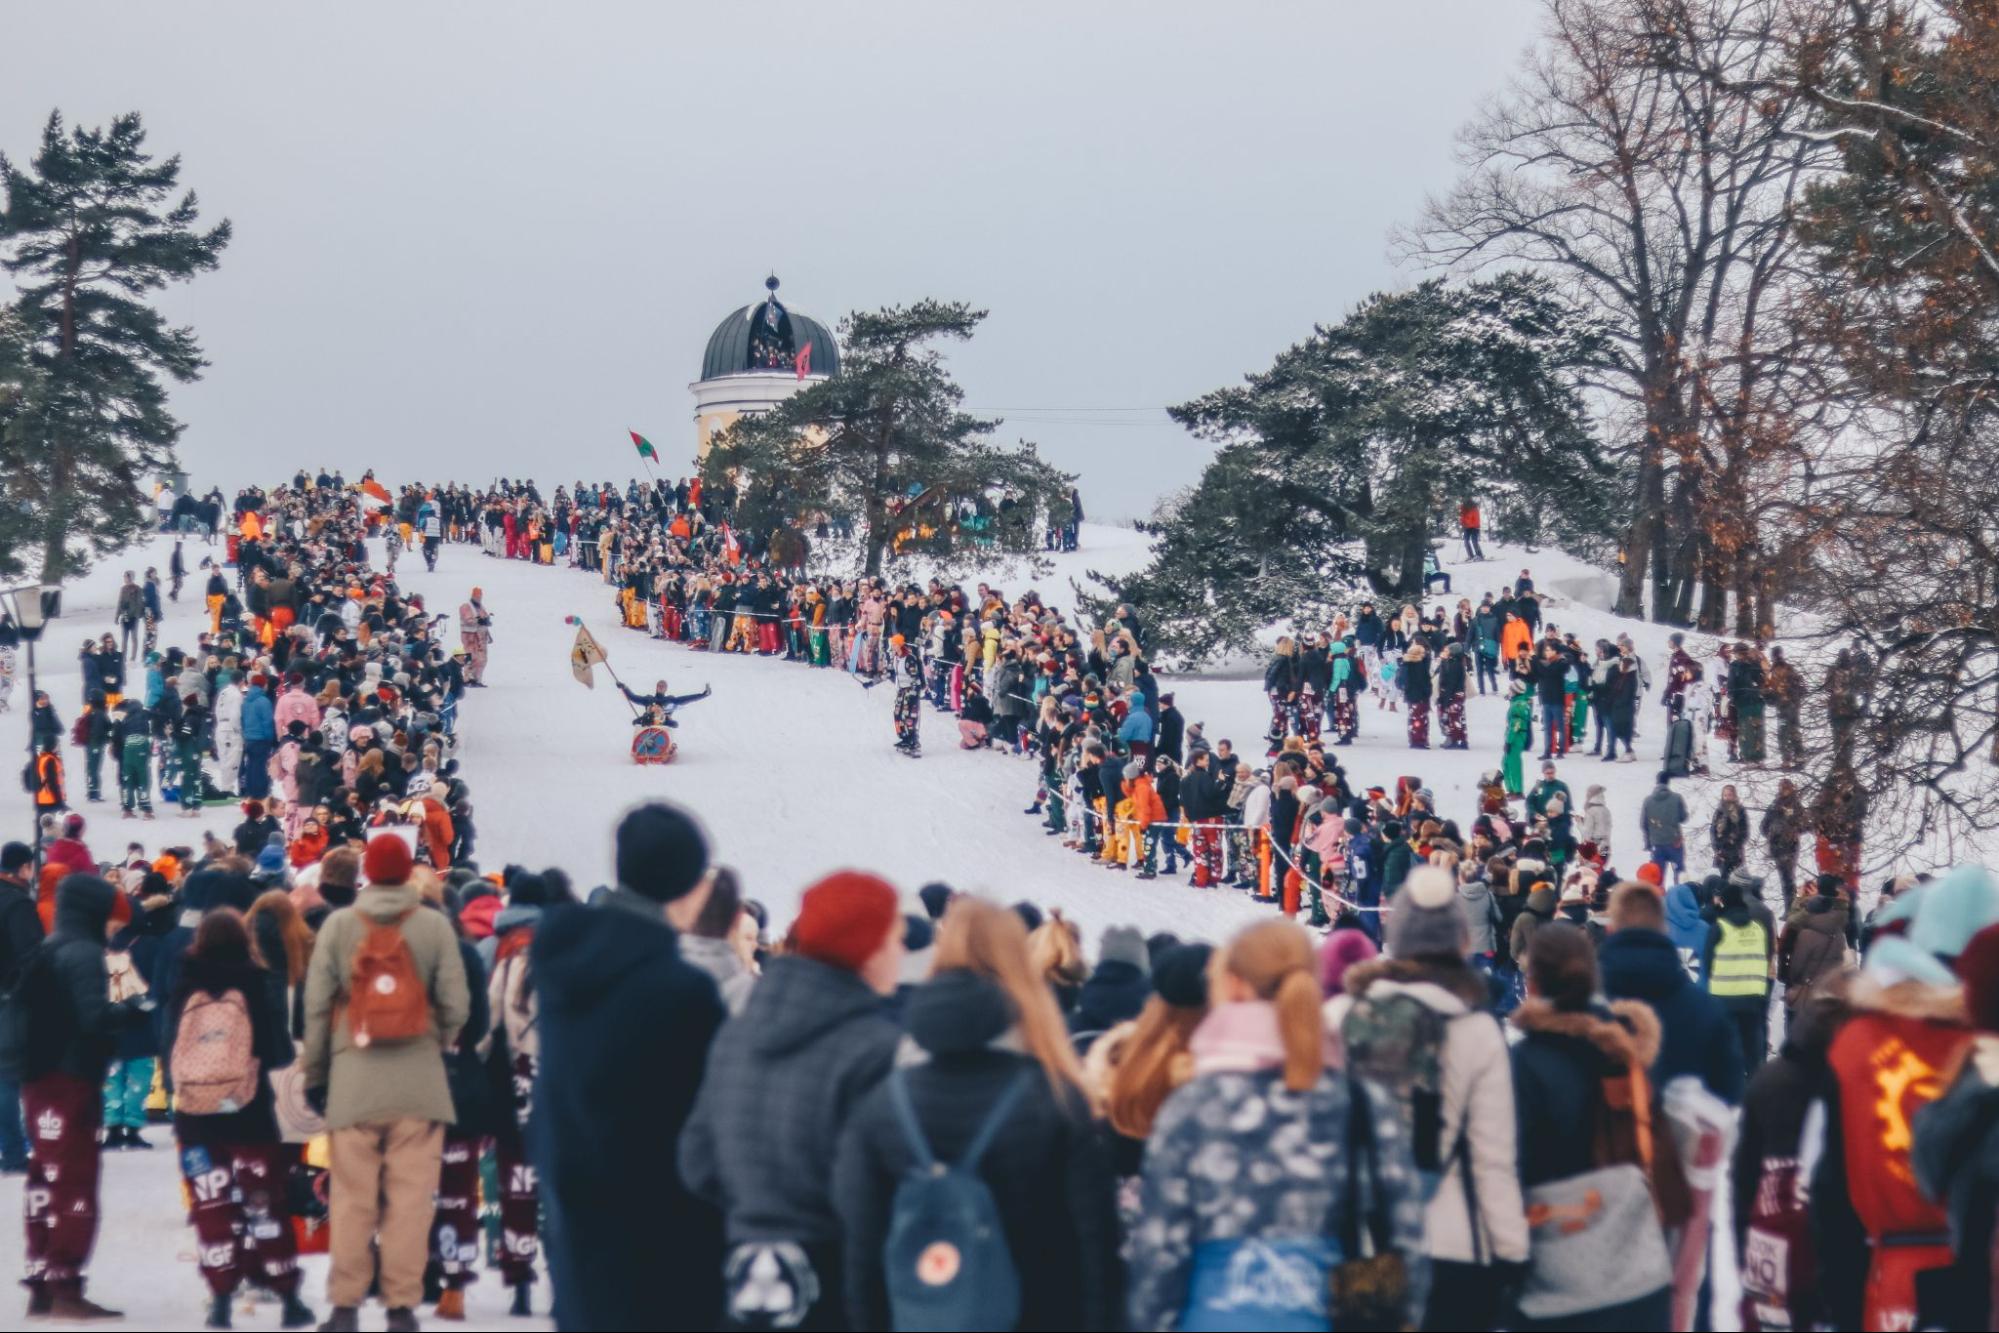 crowd at outdoor winter event